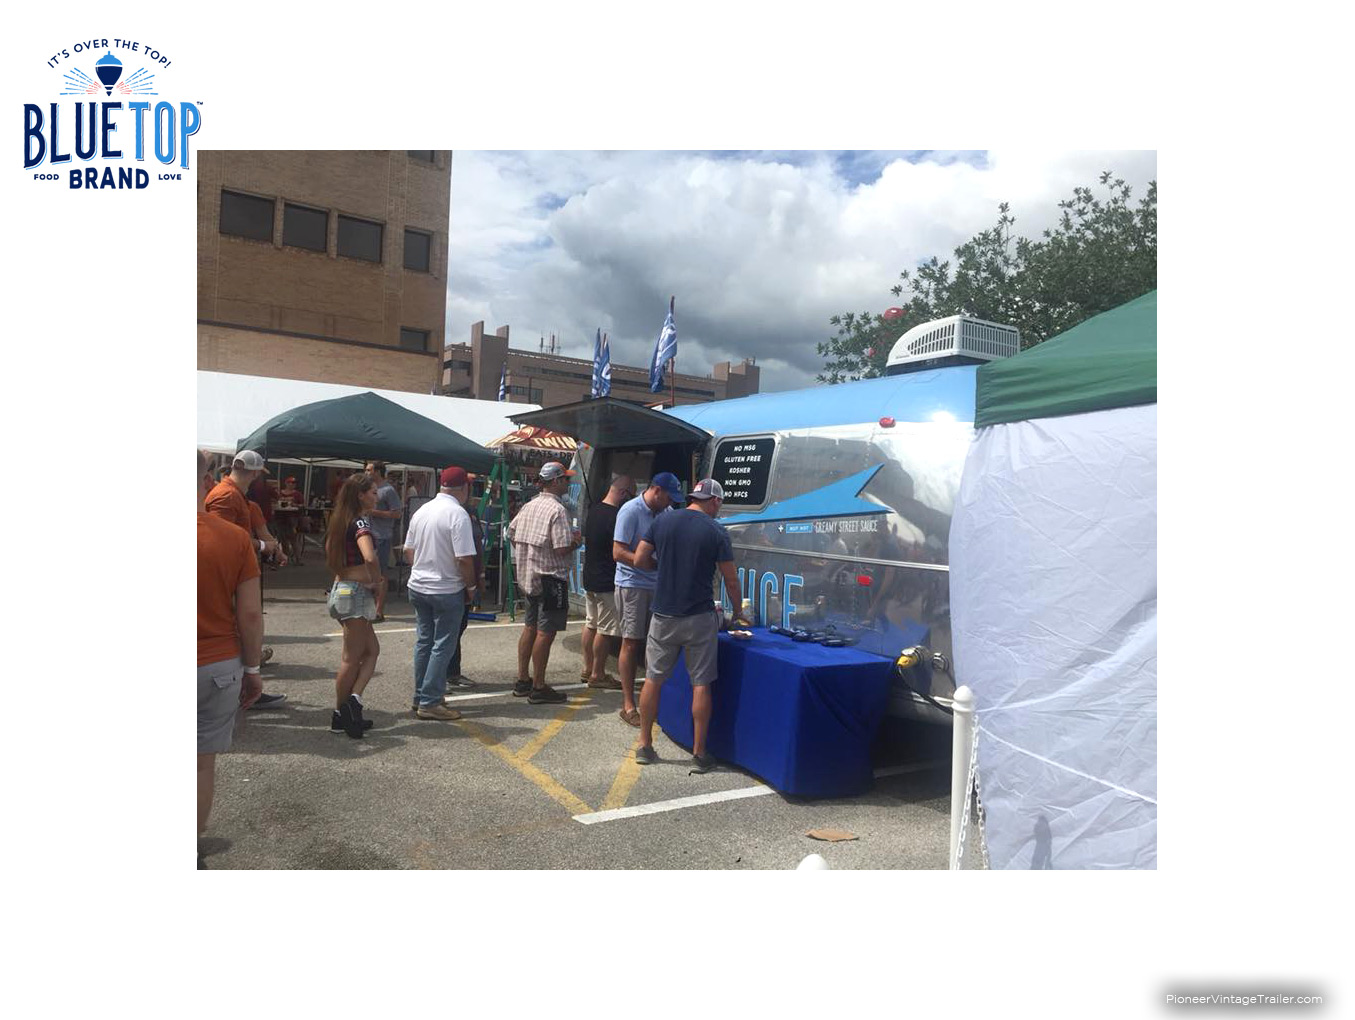 Blue Top Brand Airstream at Texas tailgate party